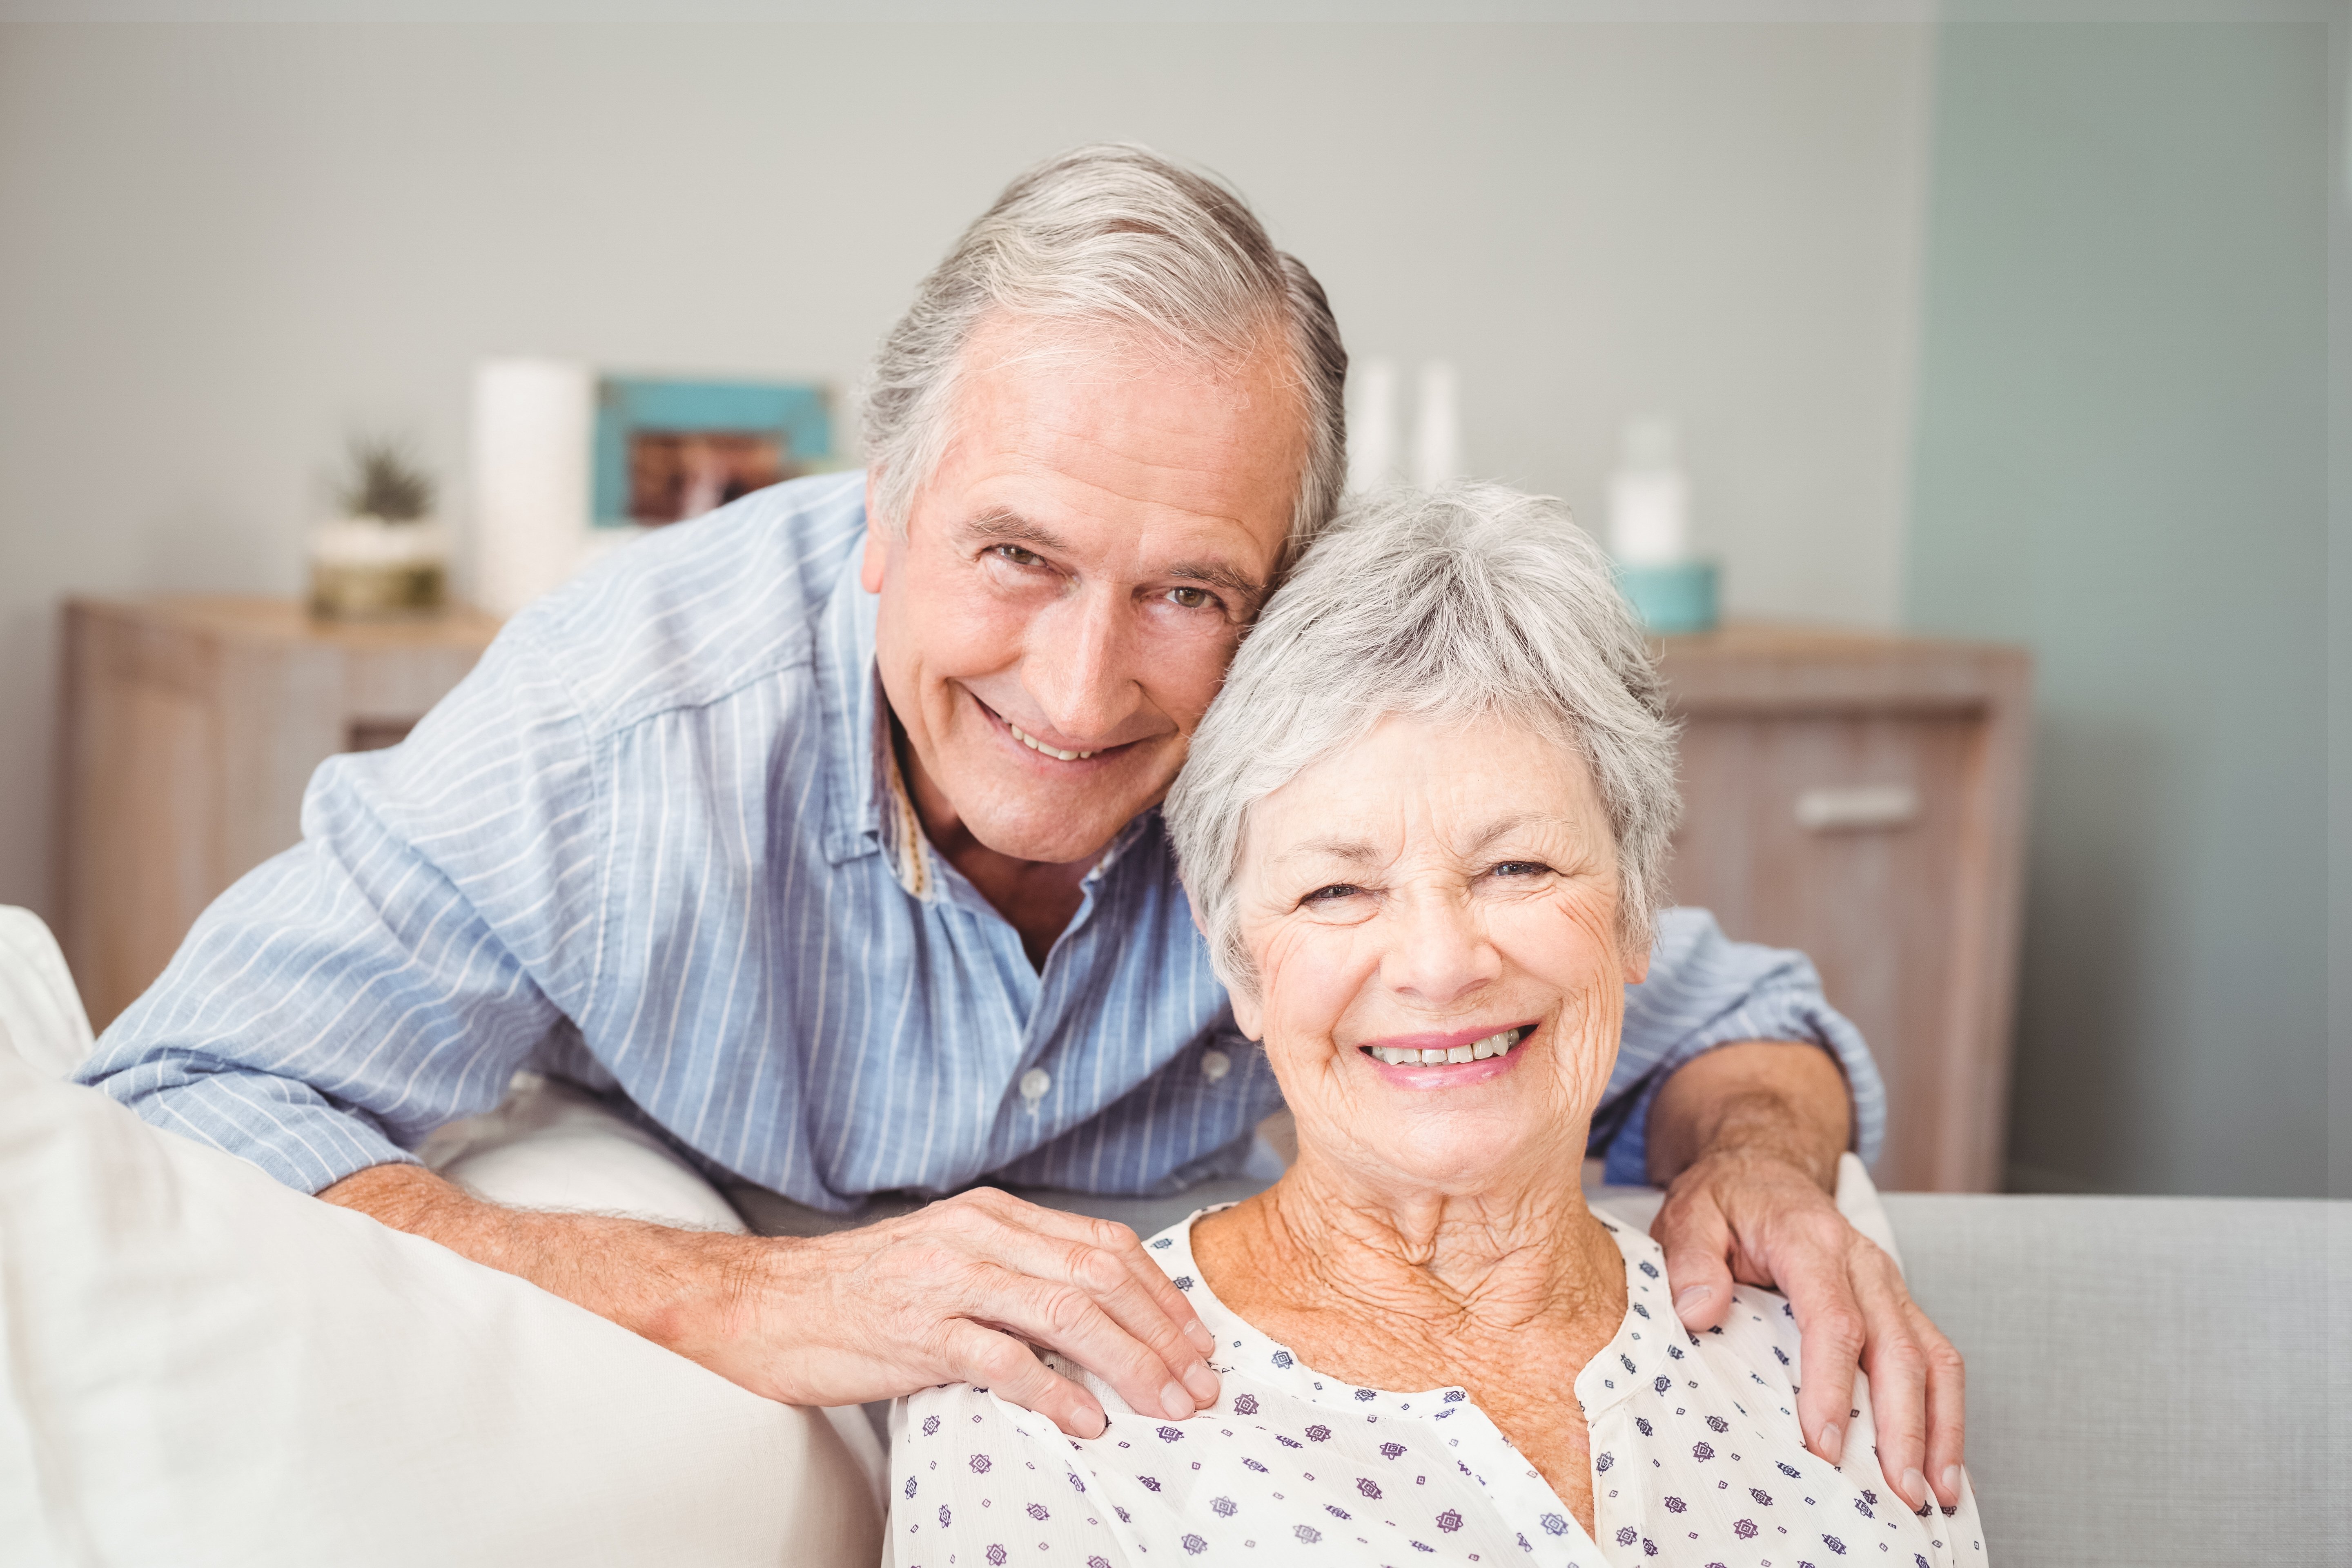 Portrait of romantic senior man with his wife at home | Photo: Shutterstock